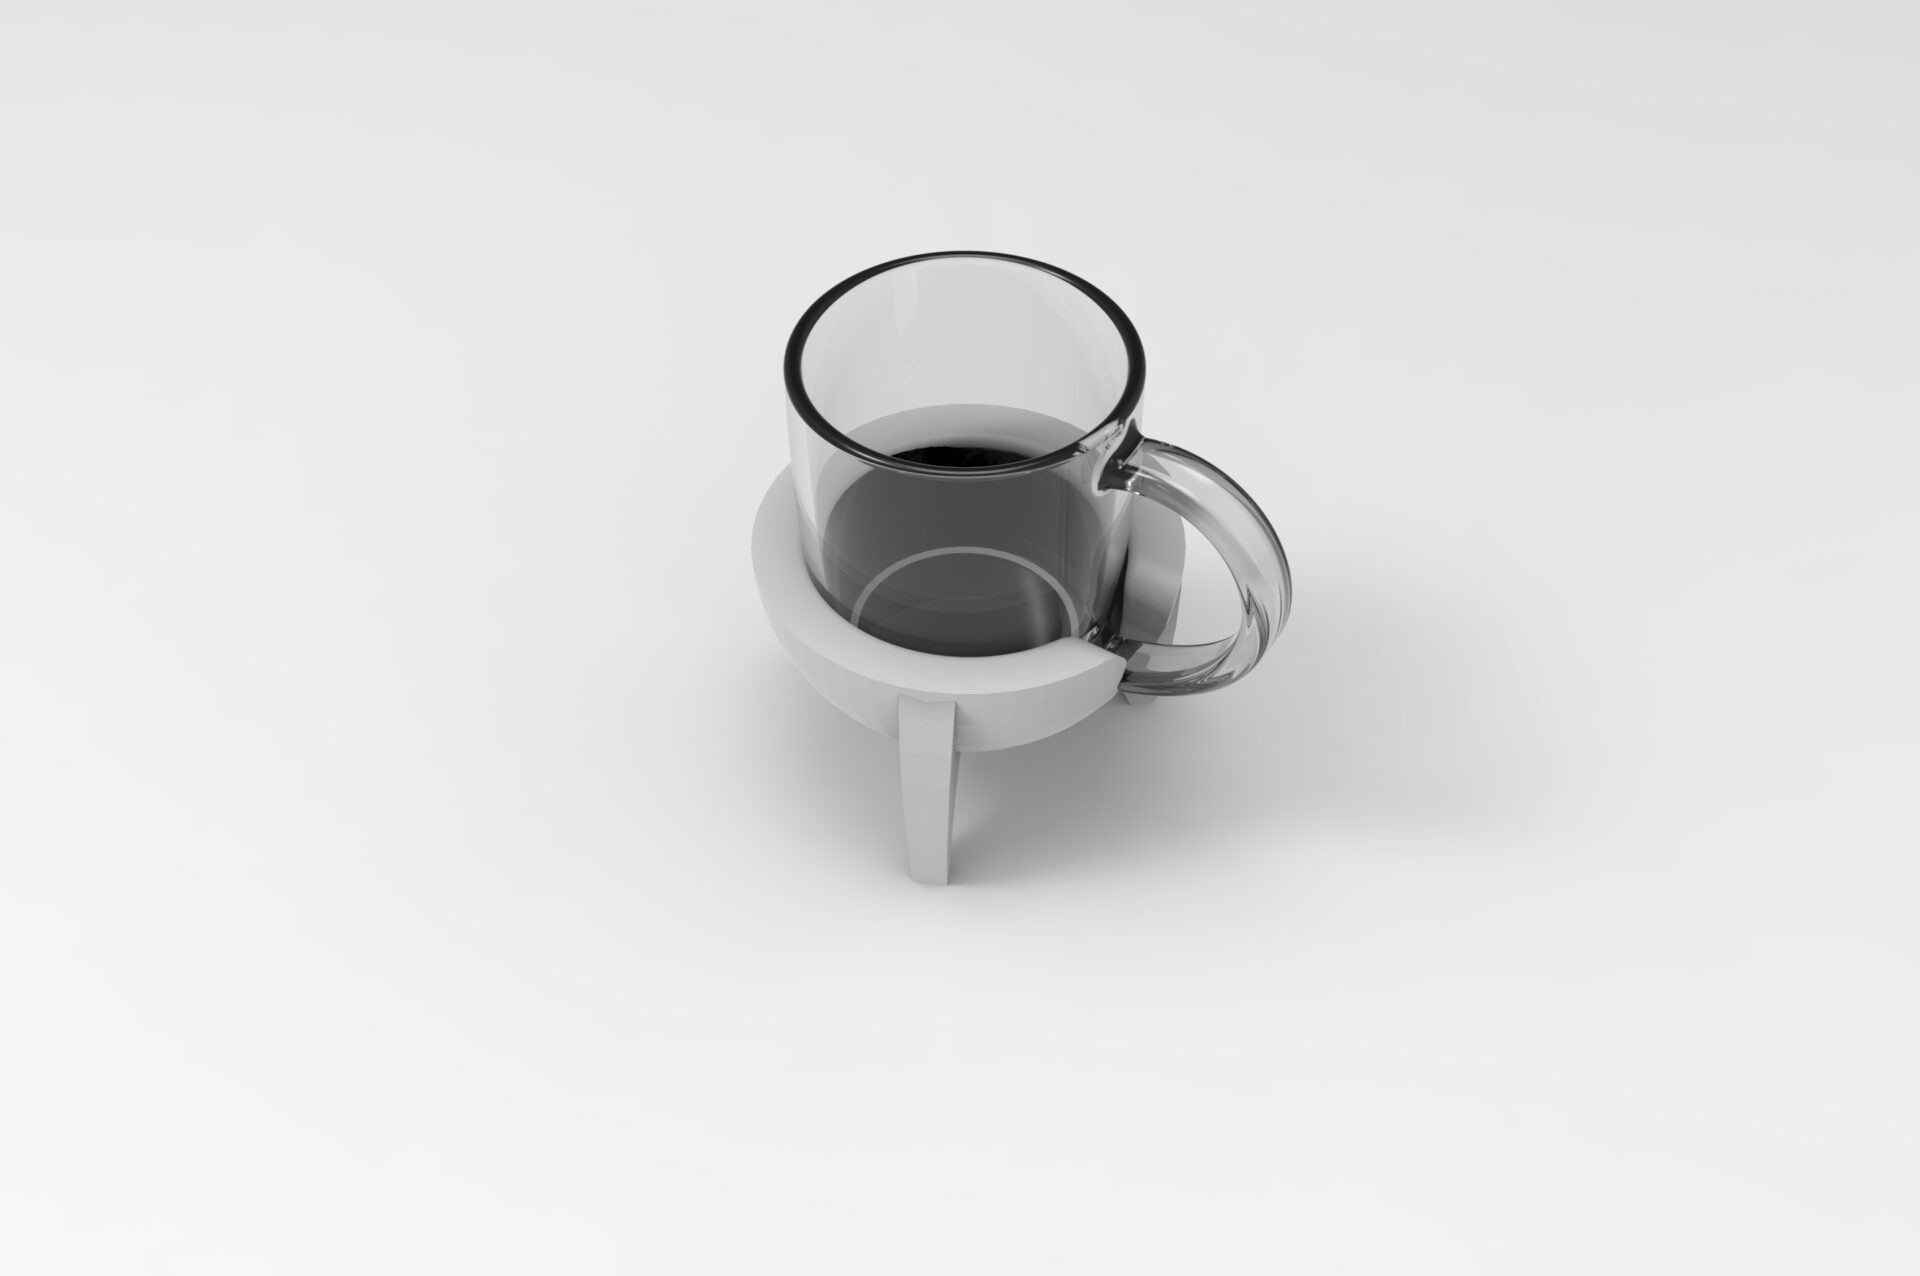 cup-holder